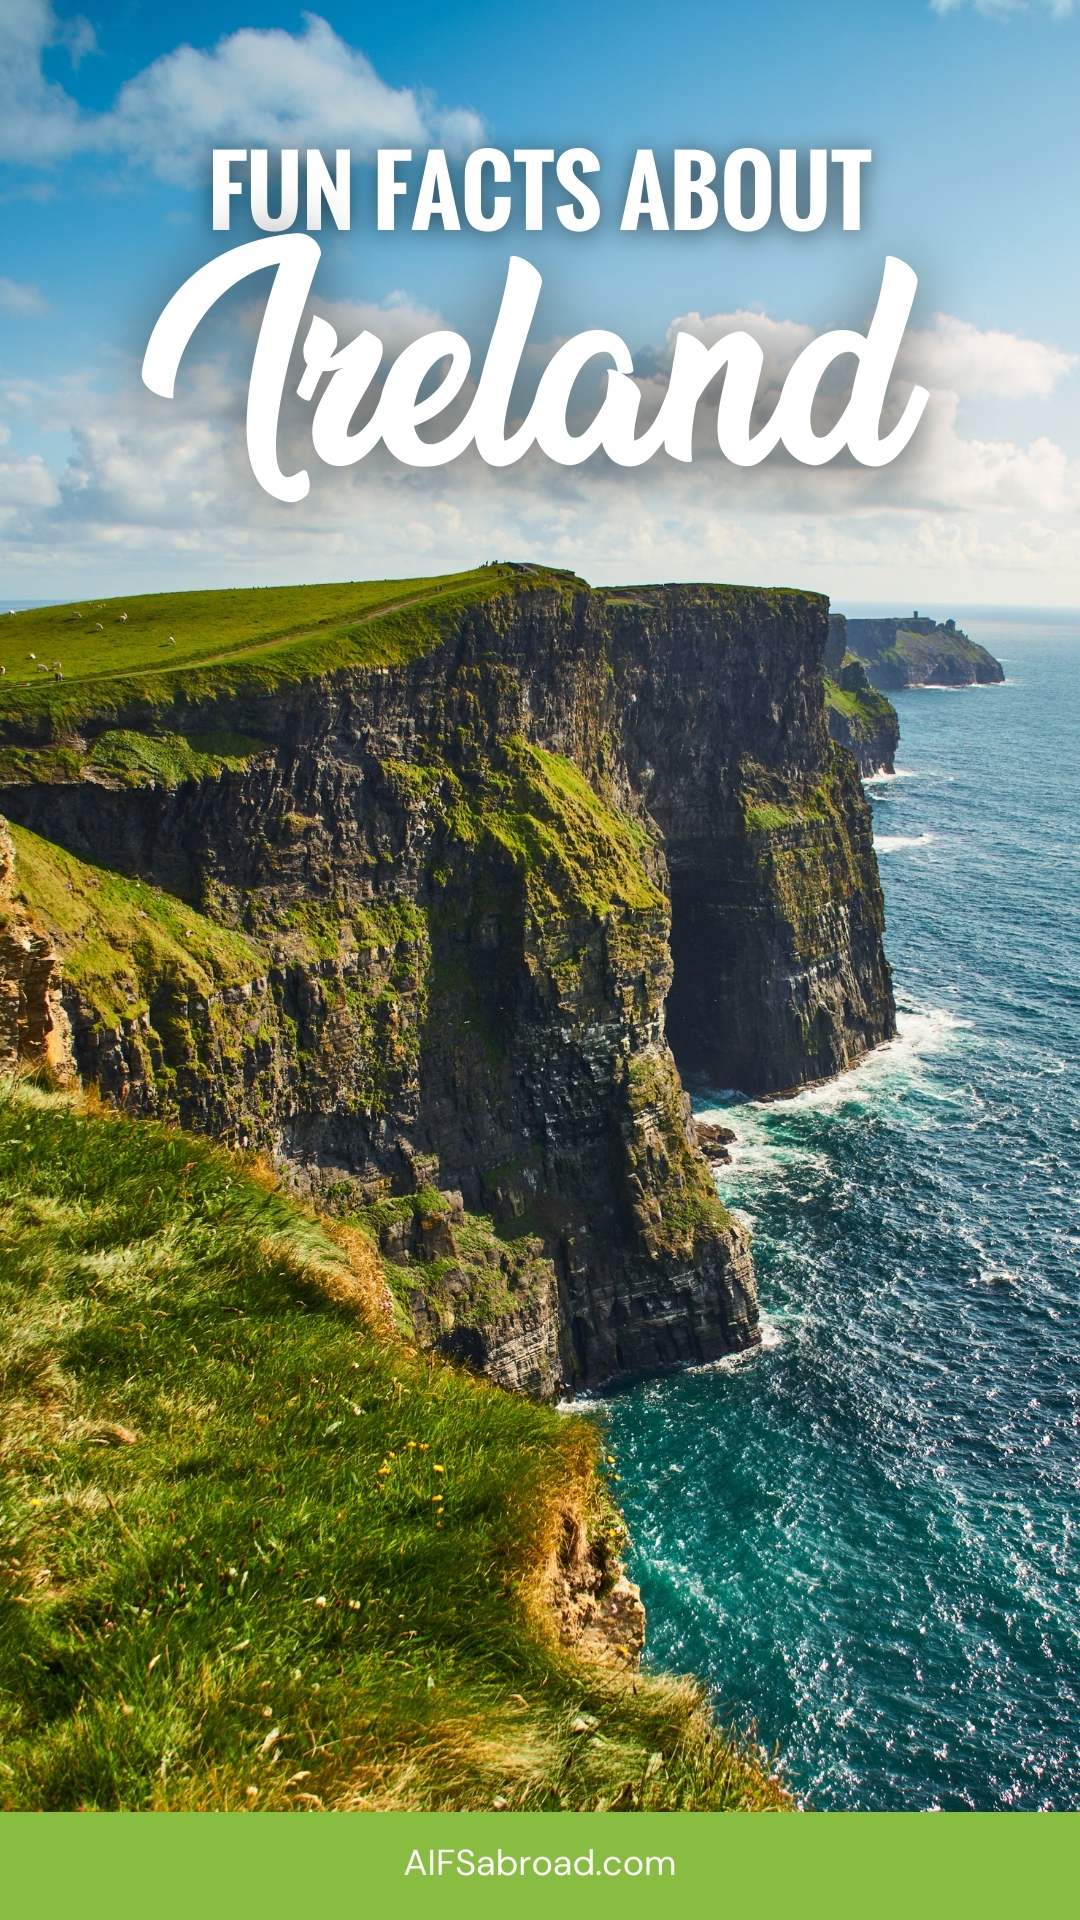 Pin image: Cliffs of Moher with text overlay saying "Fun Facts about Ireland"